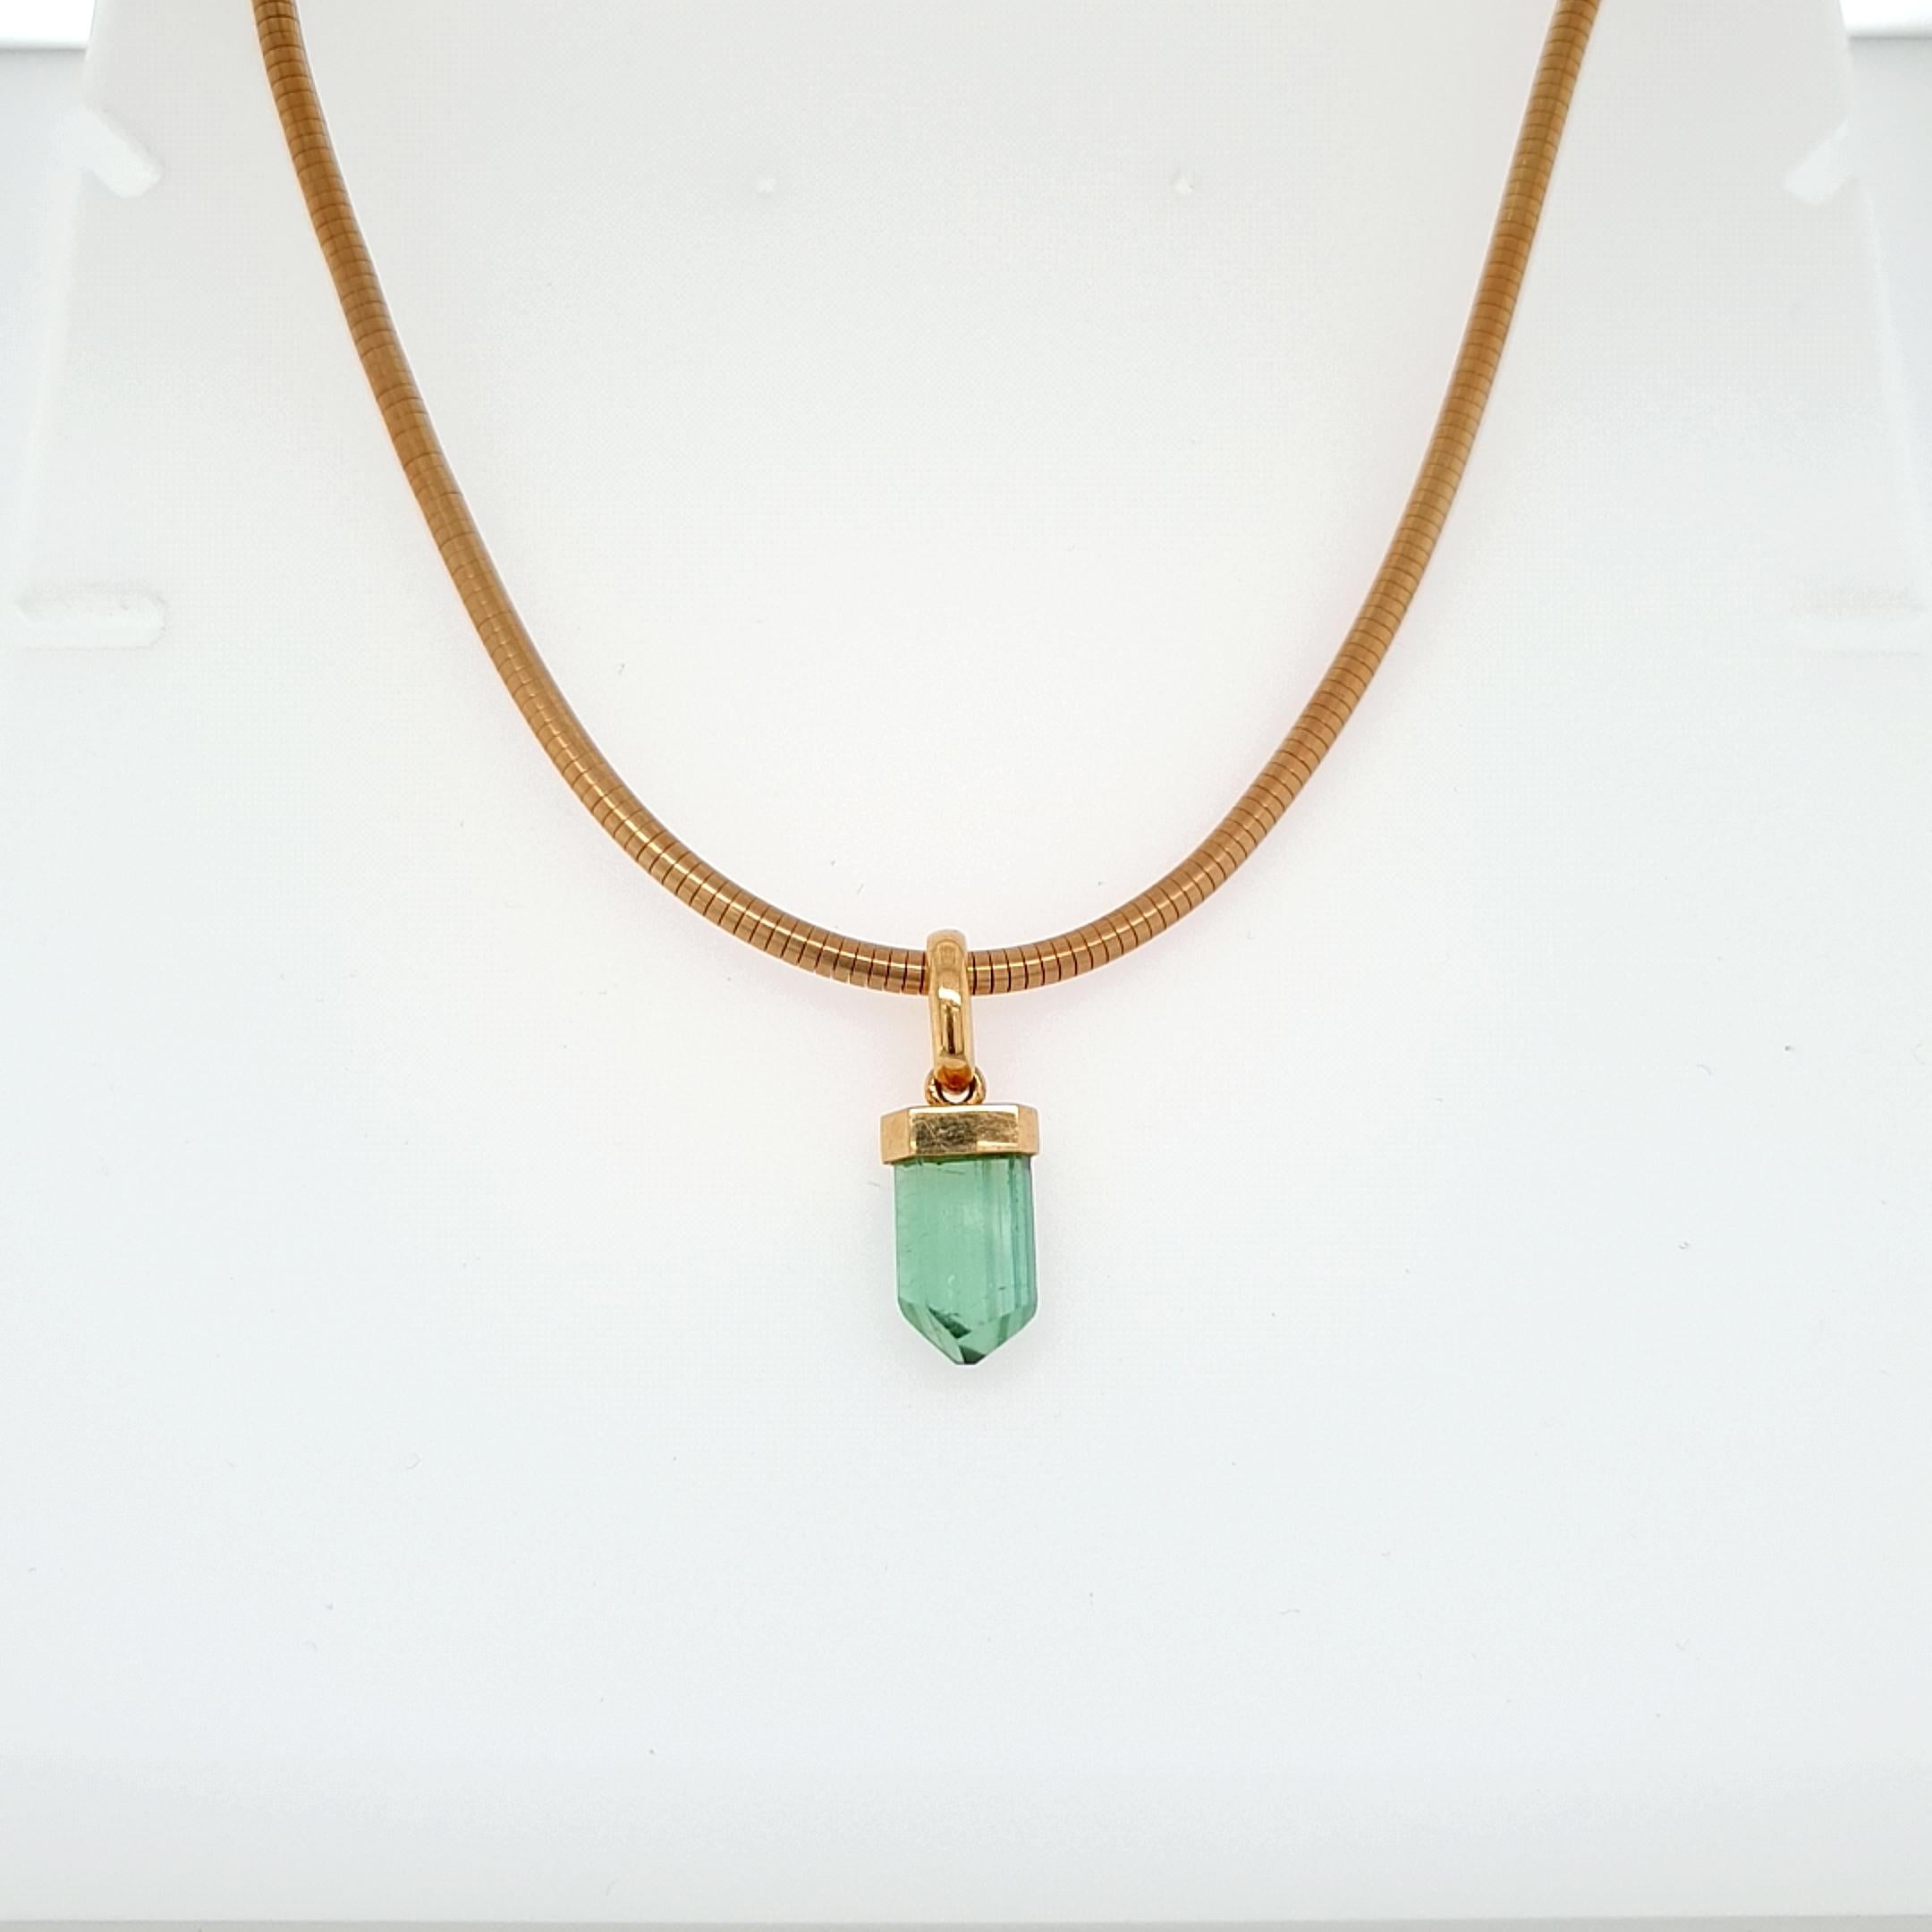 This Natural Green Tourmaline Crystal Beaded Pendant with 18 Carat yellow Gold Snake Chain is done in in German quality. The bayonet clasp is easy to handle and very secure. The crystals surface is completly natural and not repolished.

Tourmaline